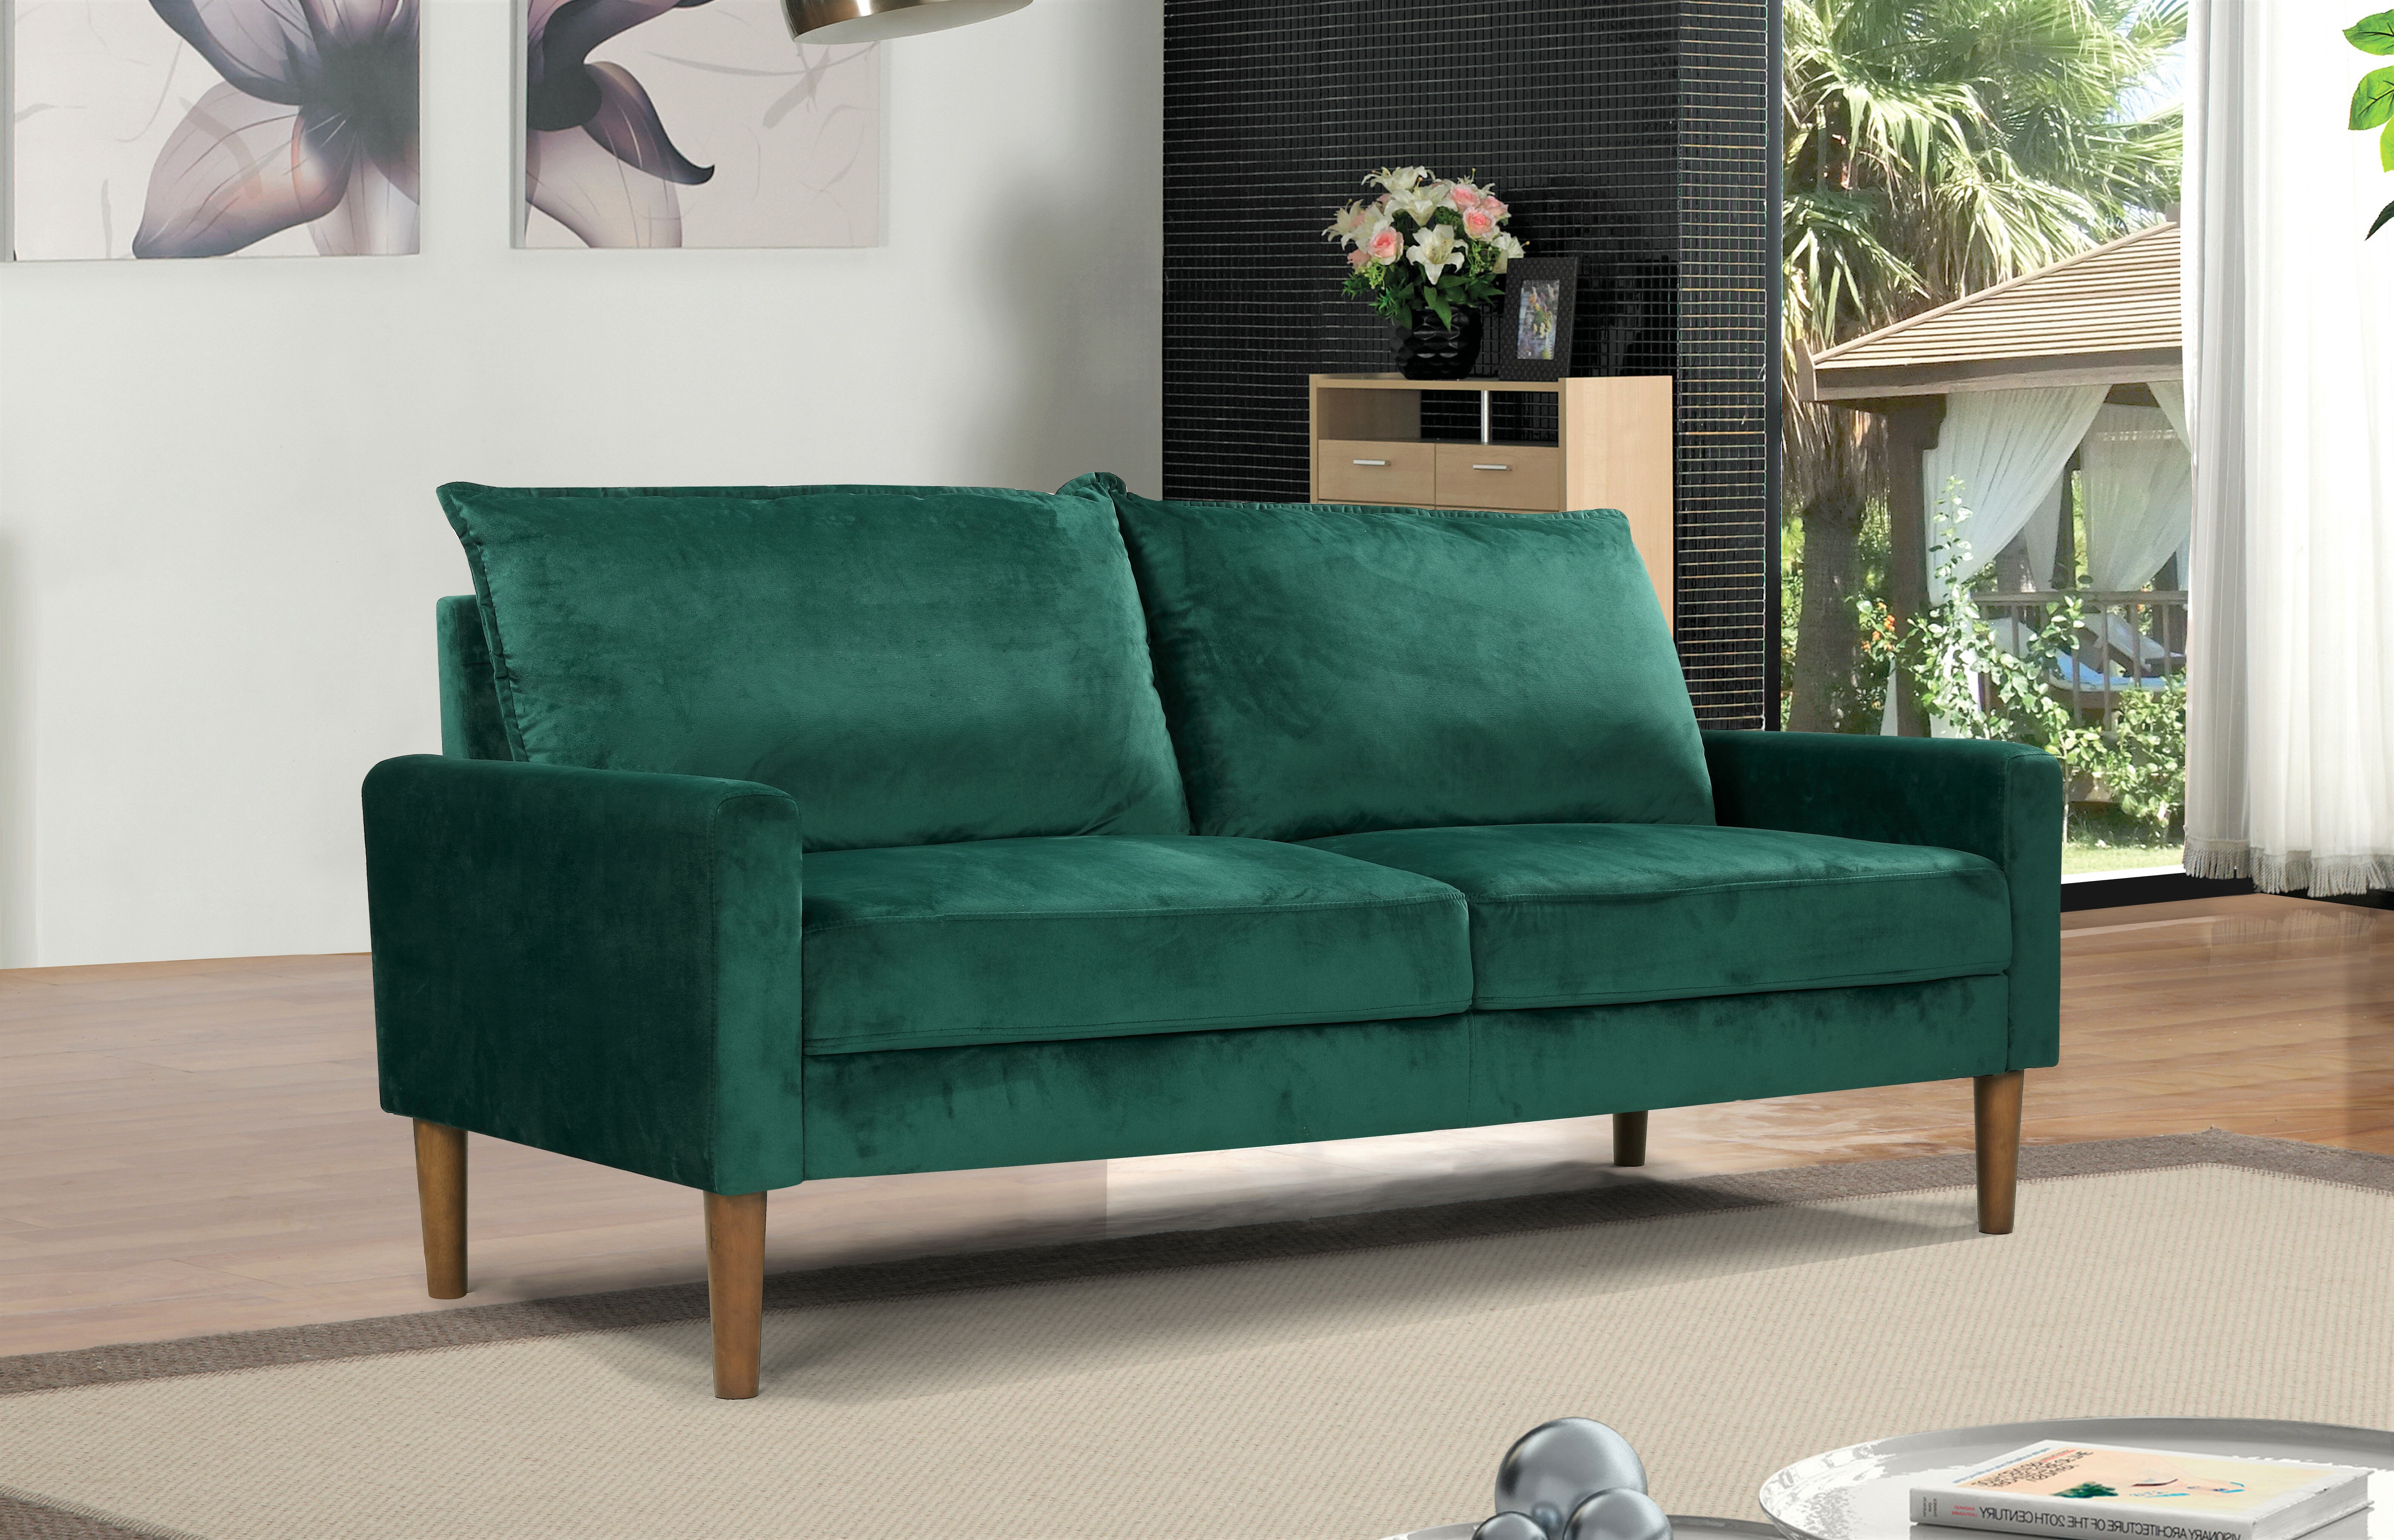 Mercer41 Petit Velvet 70 Wide Rolled Arm Chesterfield Sofa Reviews Wayfair Our beautiful antique green 3 seater chesterfield sofa bed made from 100% genuine leather. wayfair